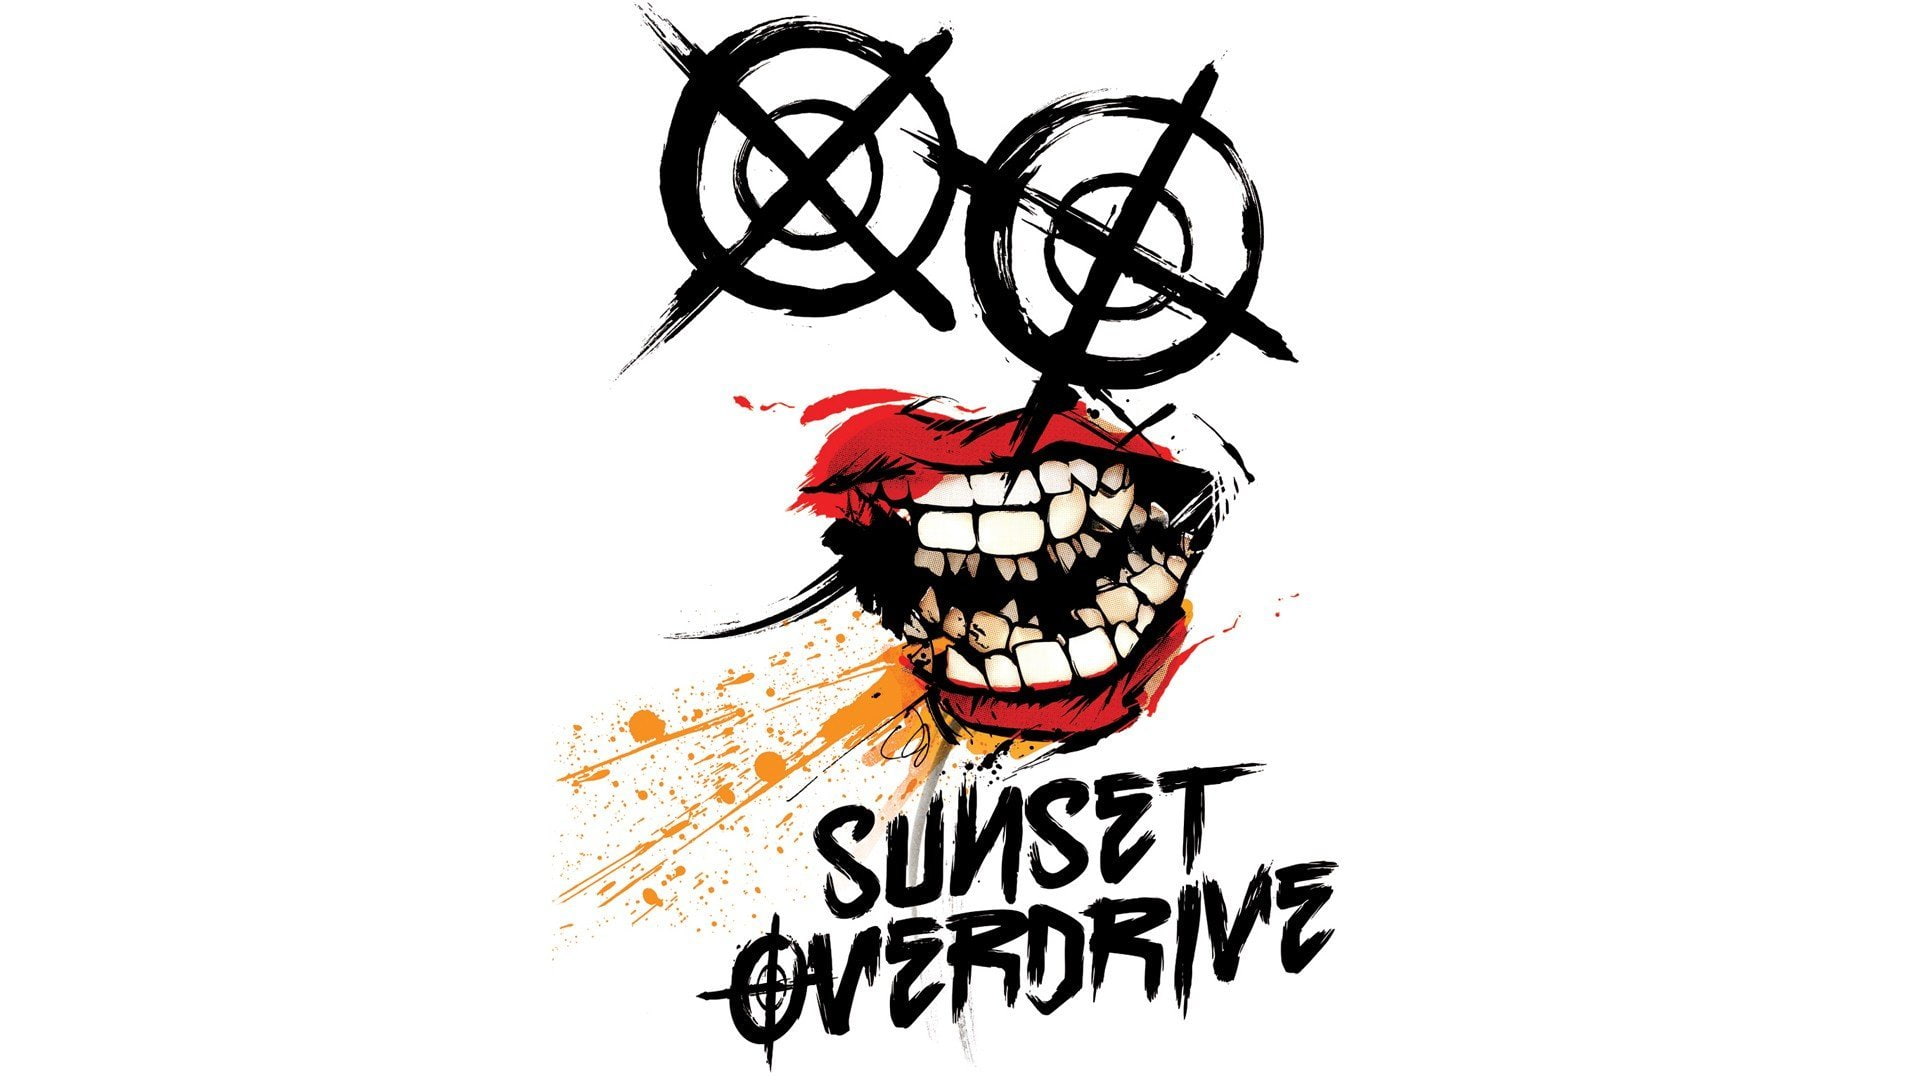 Free download | HD wallpaper: logo, Xbox One, Sunset Overdrive ...